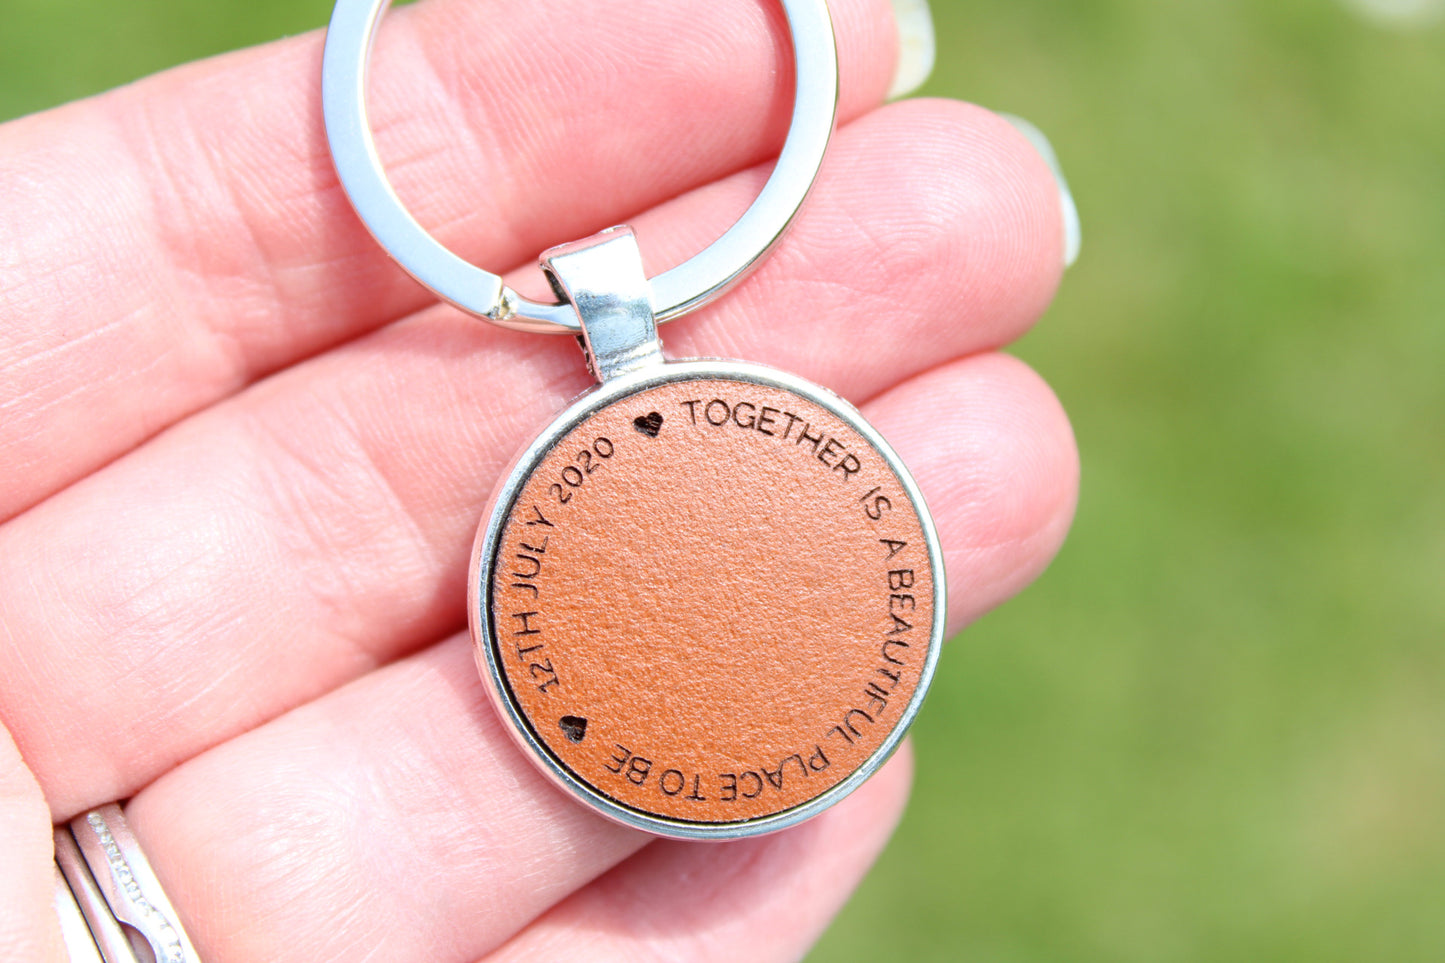 'Together is a beautiful place to be' leather keyring